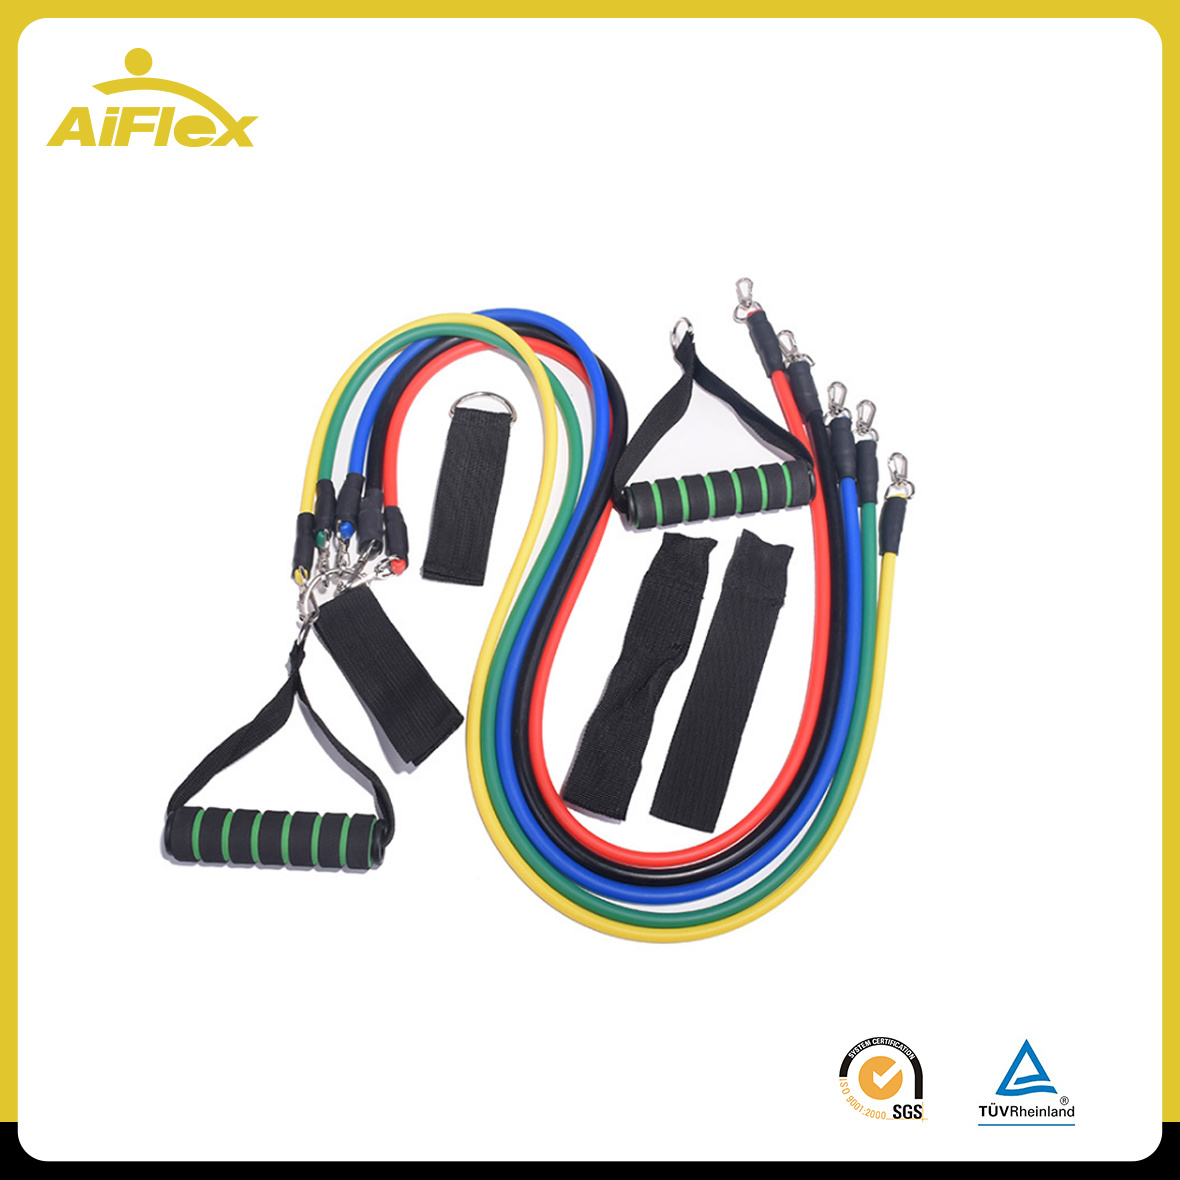 Fitness Resistance Exercise Band Set